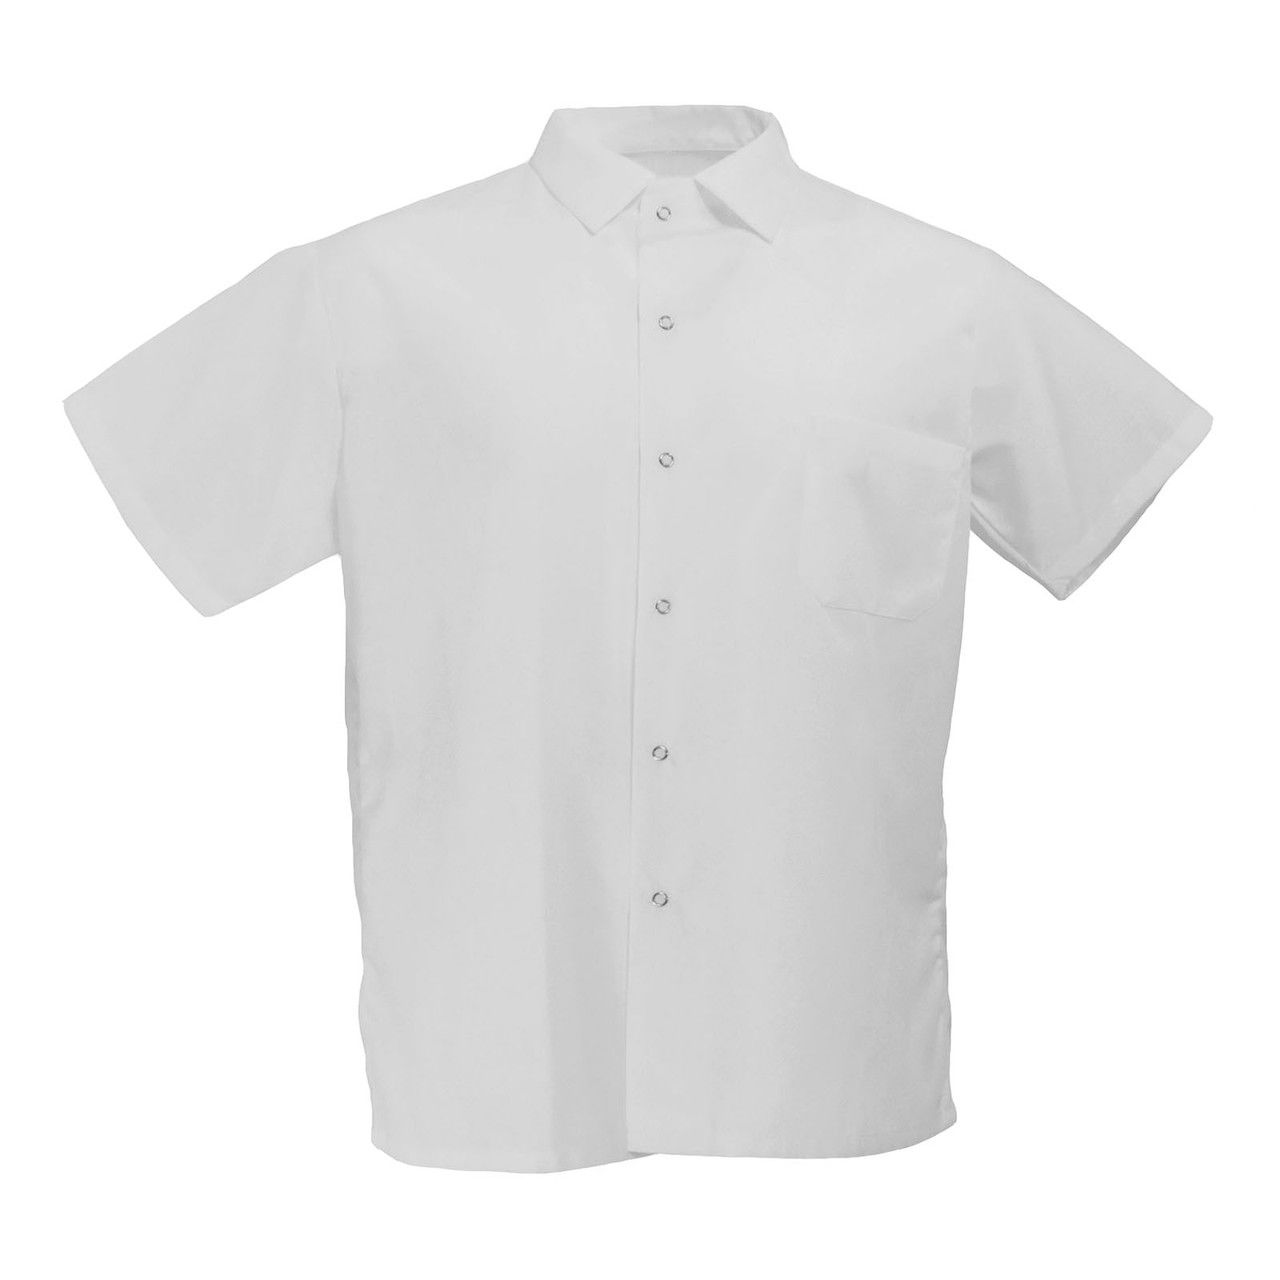 From which location are the Chef Trend S102 chef white shirts shipped?